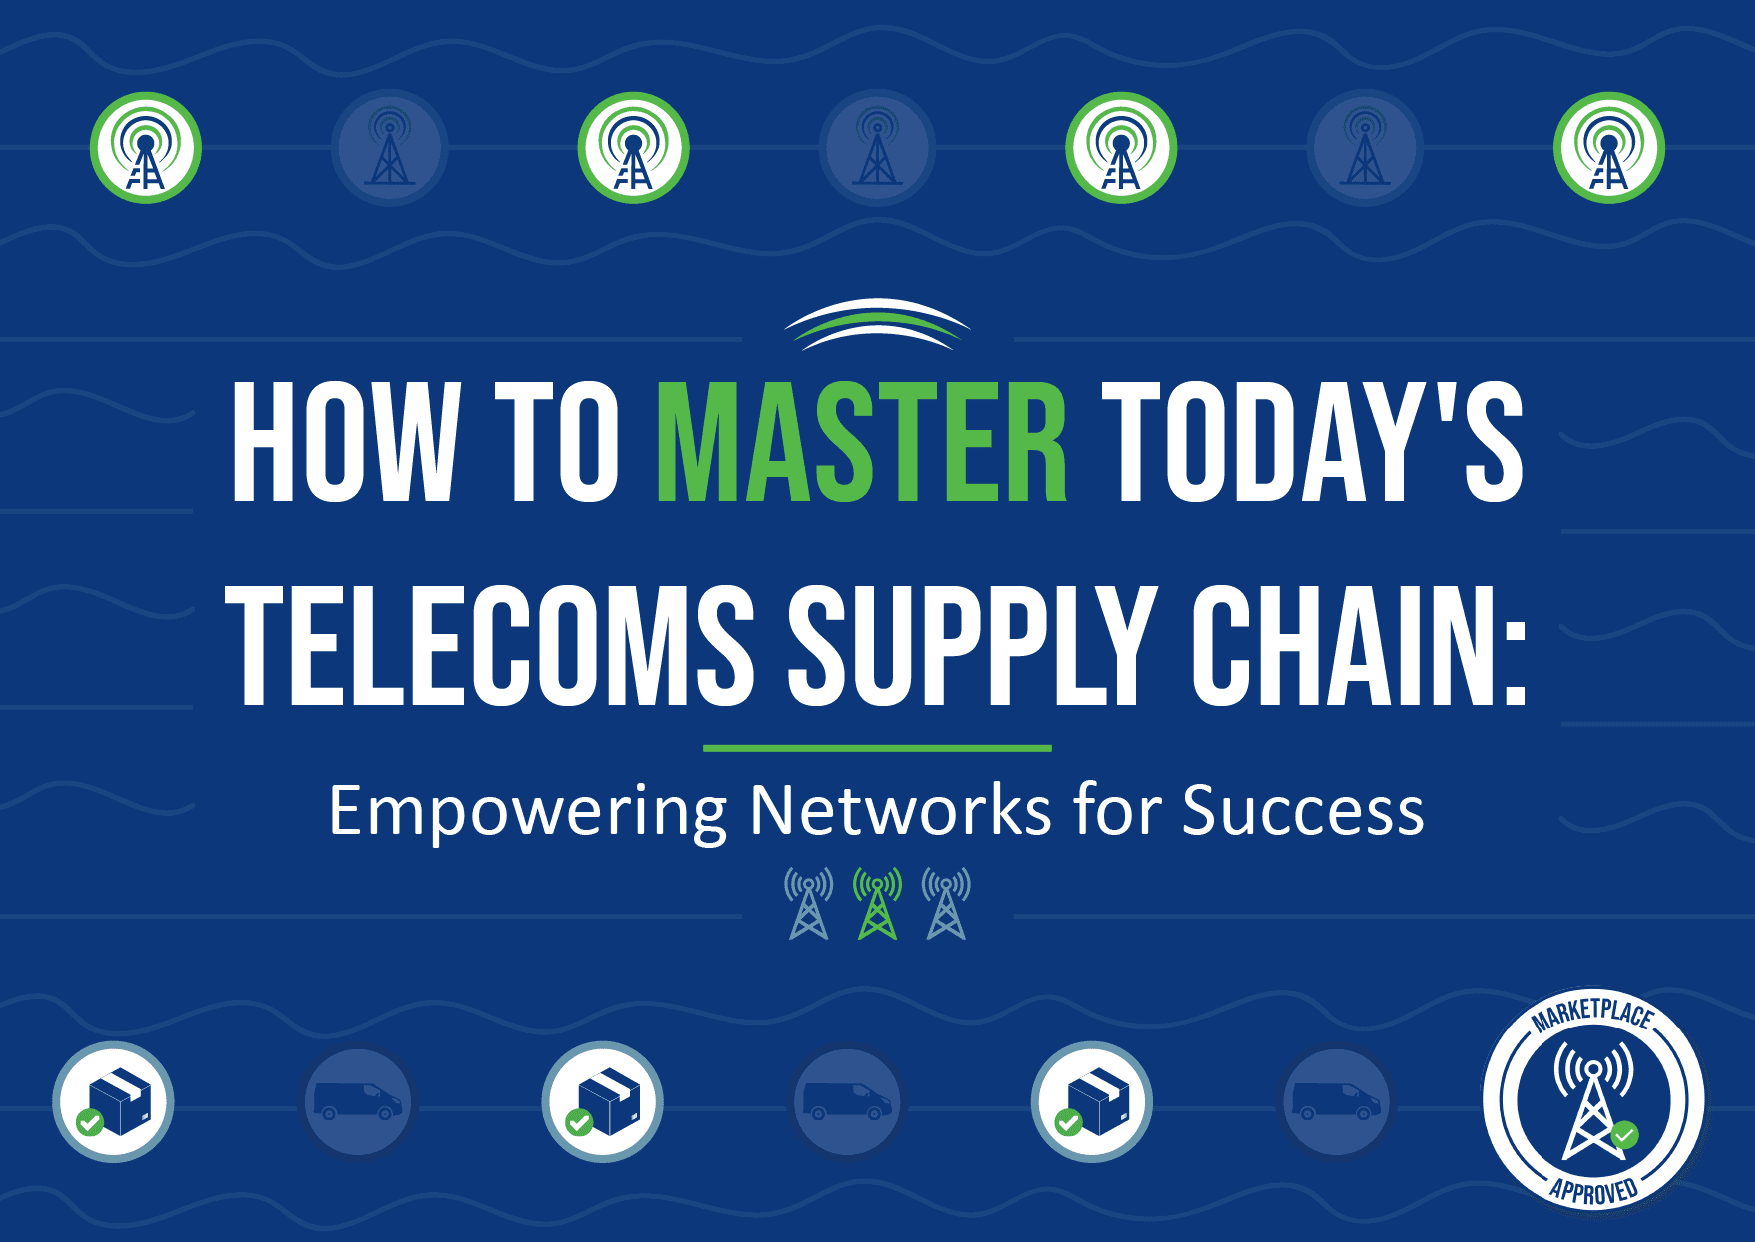 How to Master Today’s Telecom Supply Chain: Empowering Networks for Success Blog Header Image